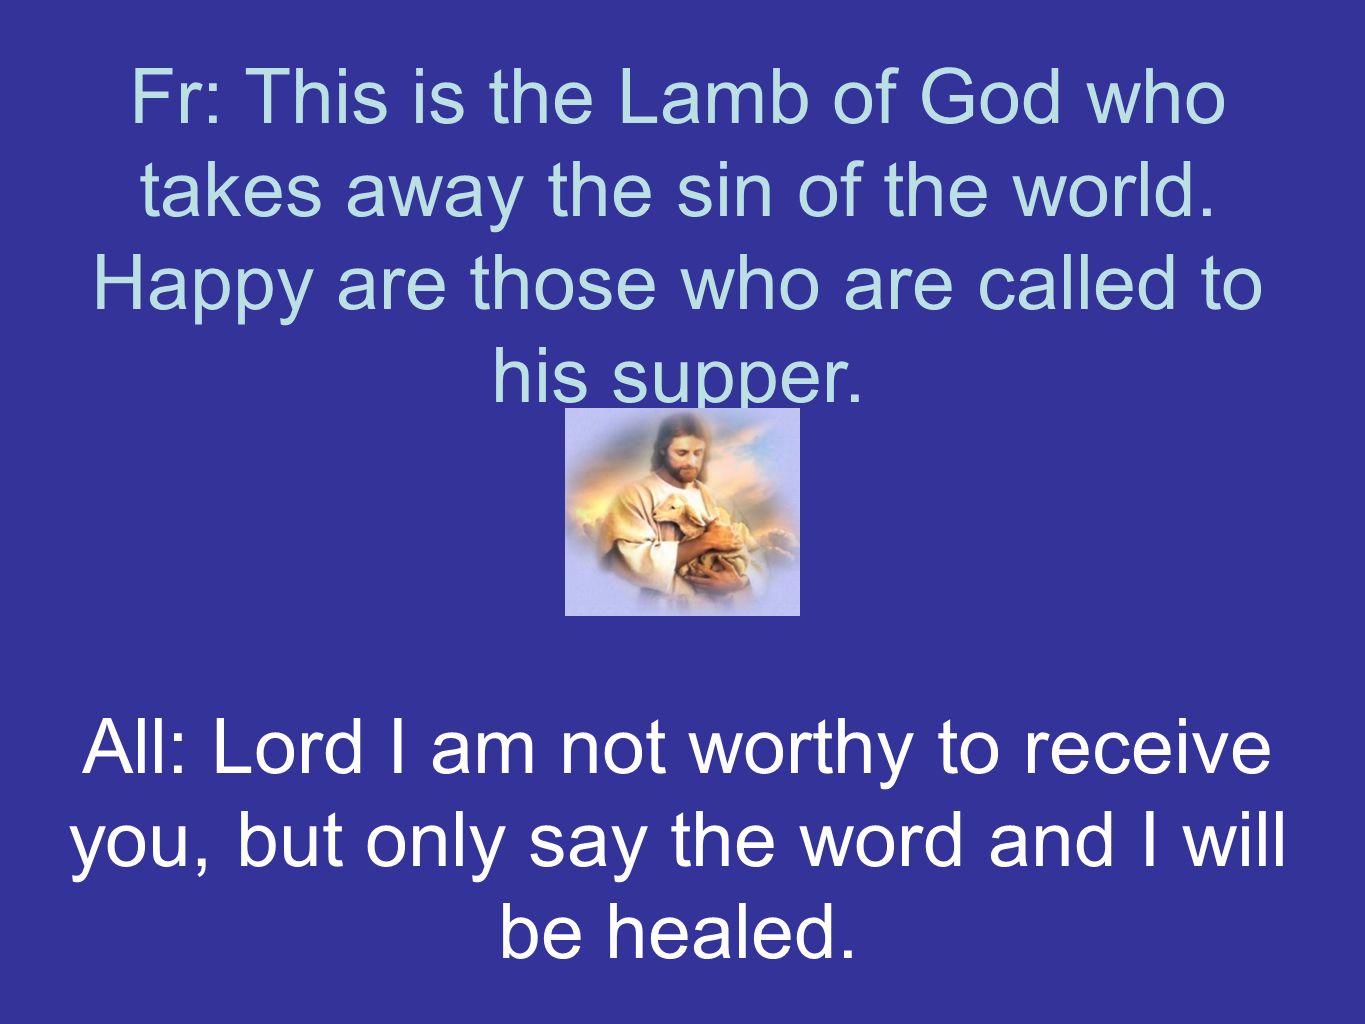 Fr: This is the Lamb of God who takes away the sin of the world.